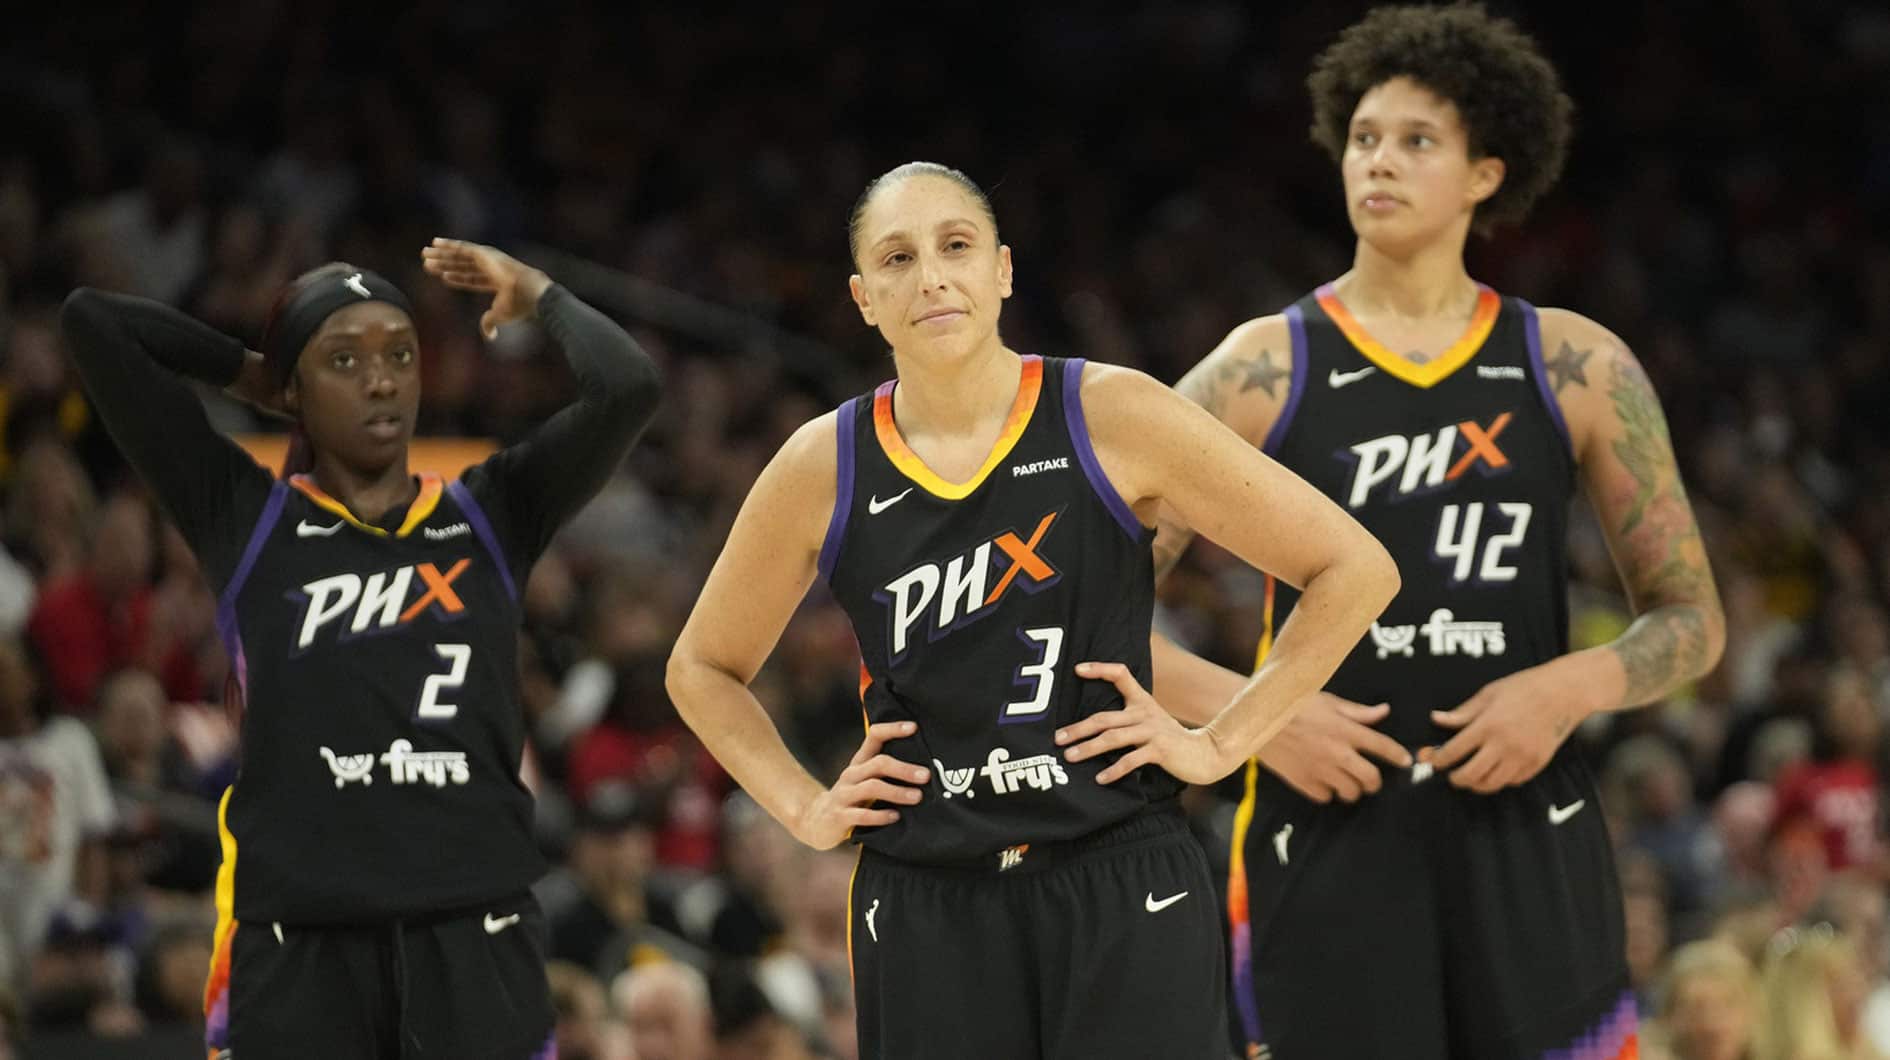 Phoenix Mercury guards Kahleah Copper (2) and Diana Taurasi (3) and center Brittney Griner (42) wait for free throws during the fourth quarter against the Indiana Fever at Footprint Center.